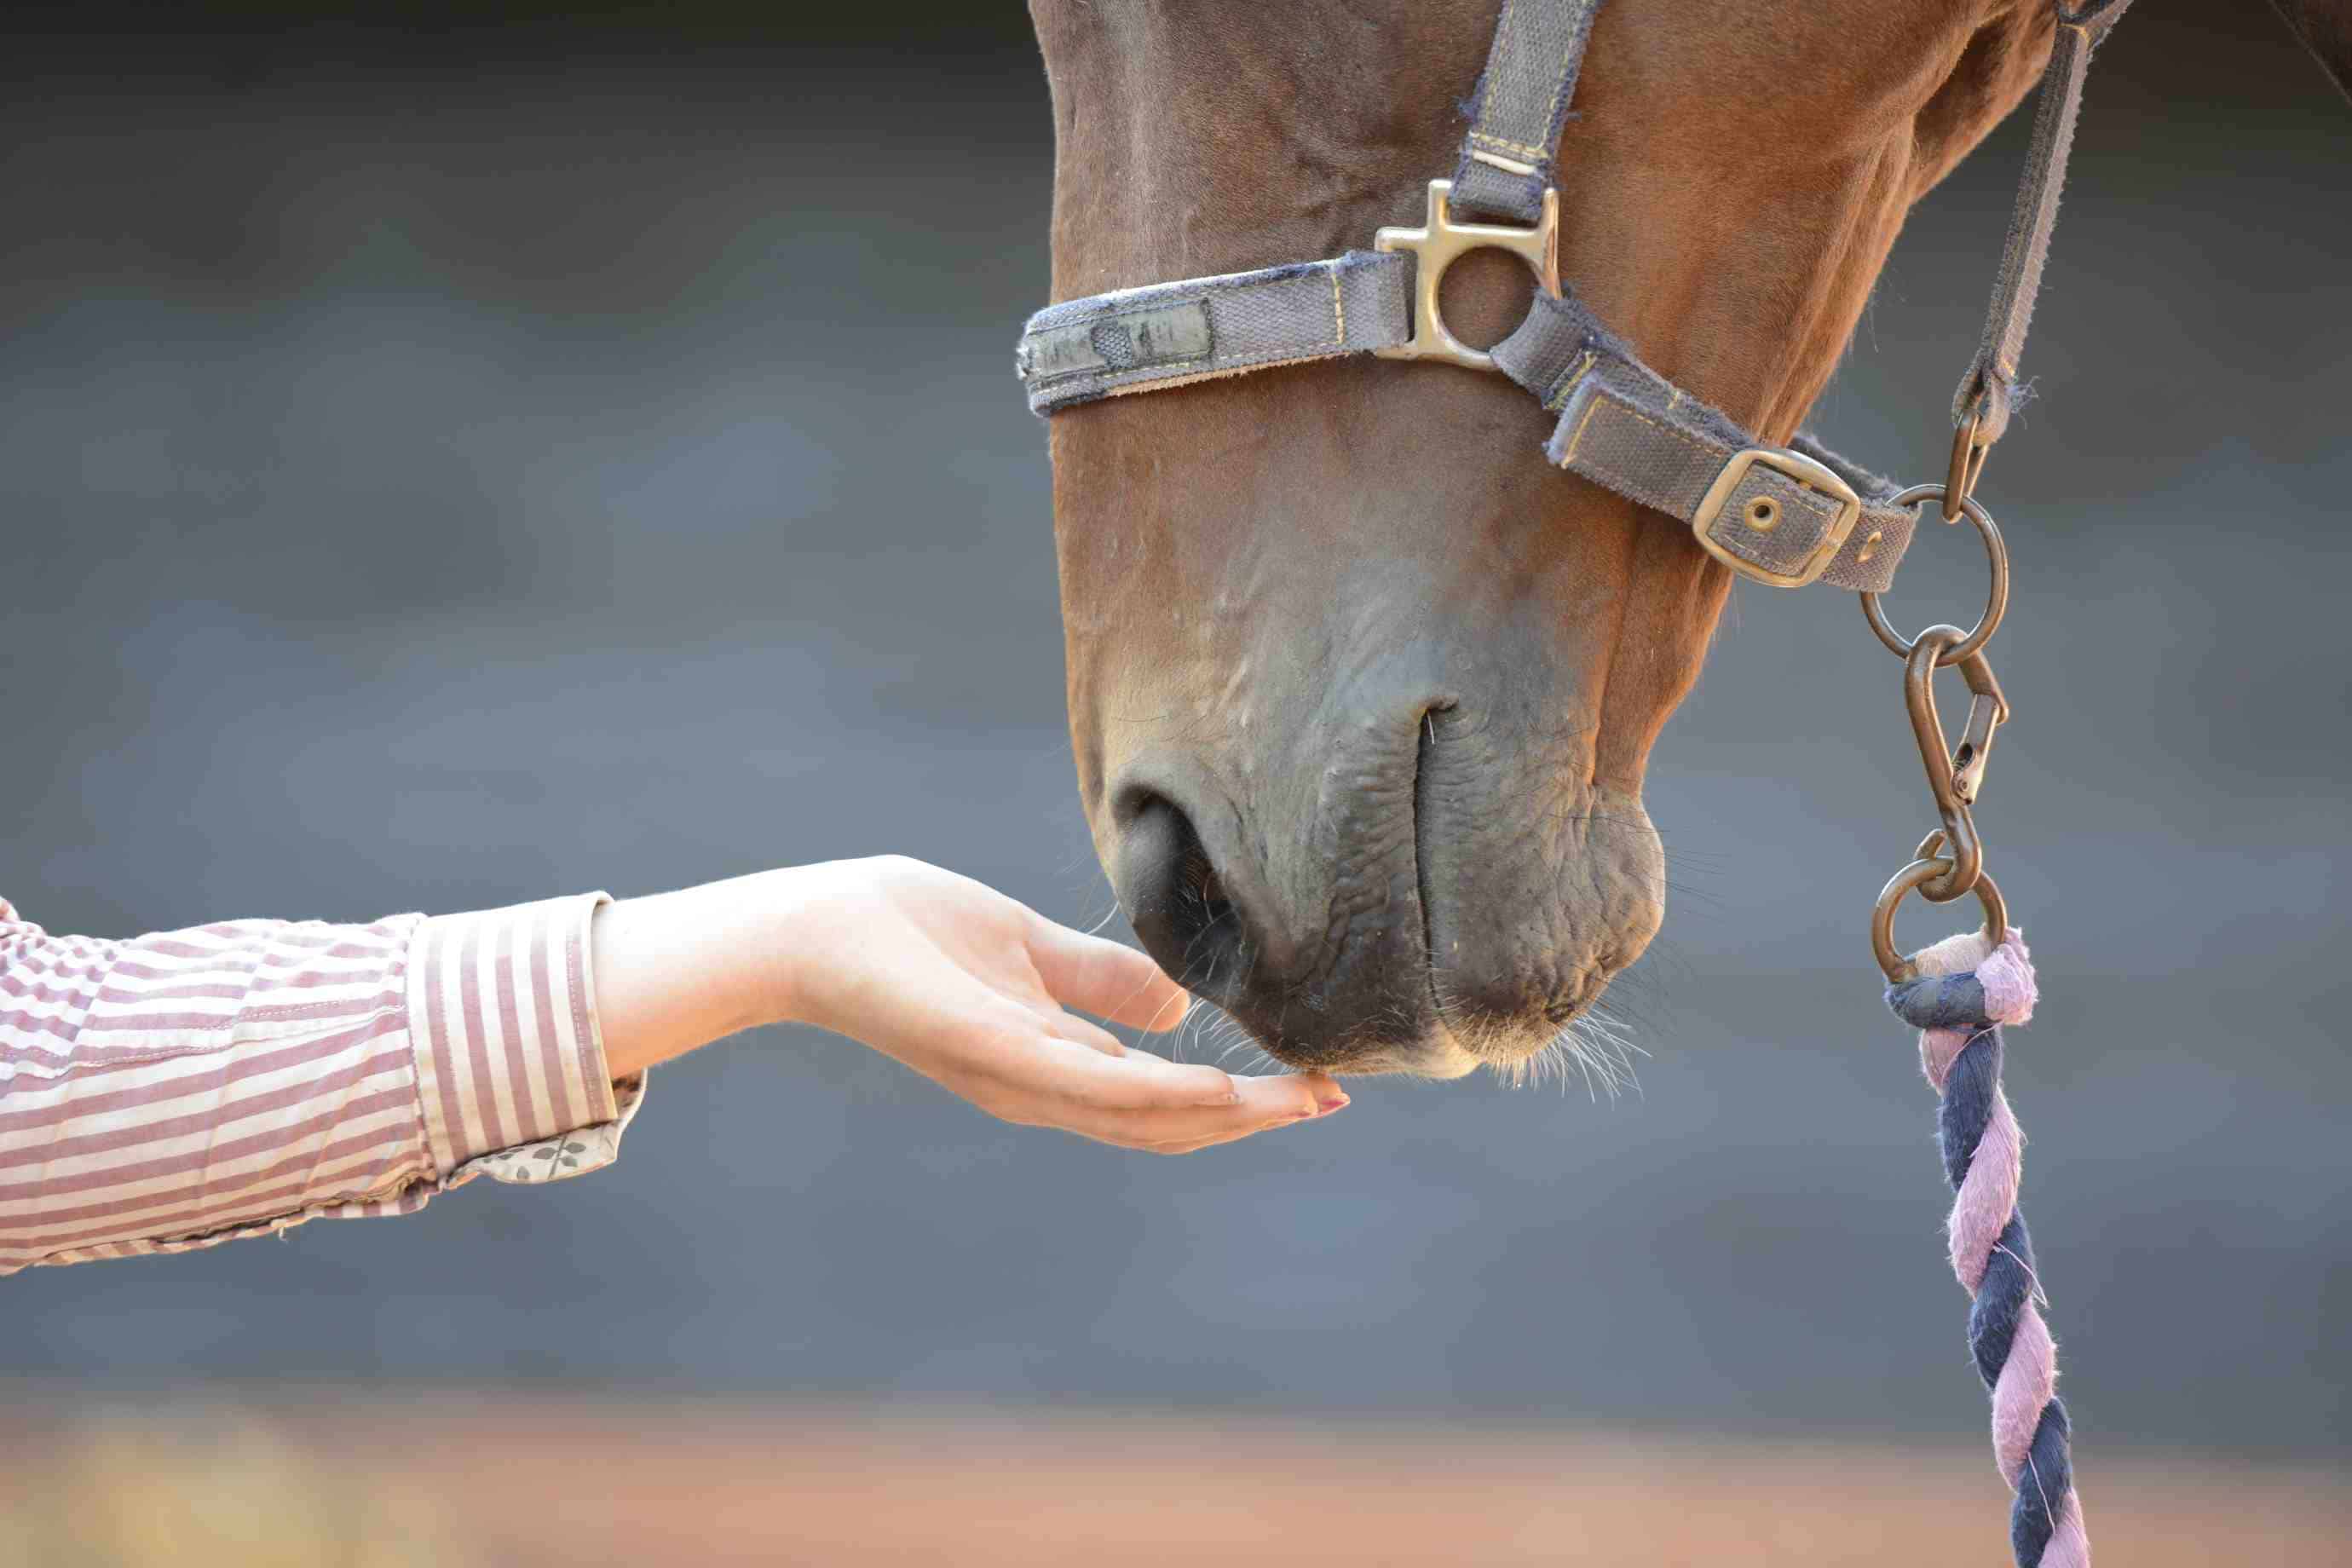 Feeding limestone flour to my horse for added nutrients, is this  beneficial? | Horse and Rider